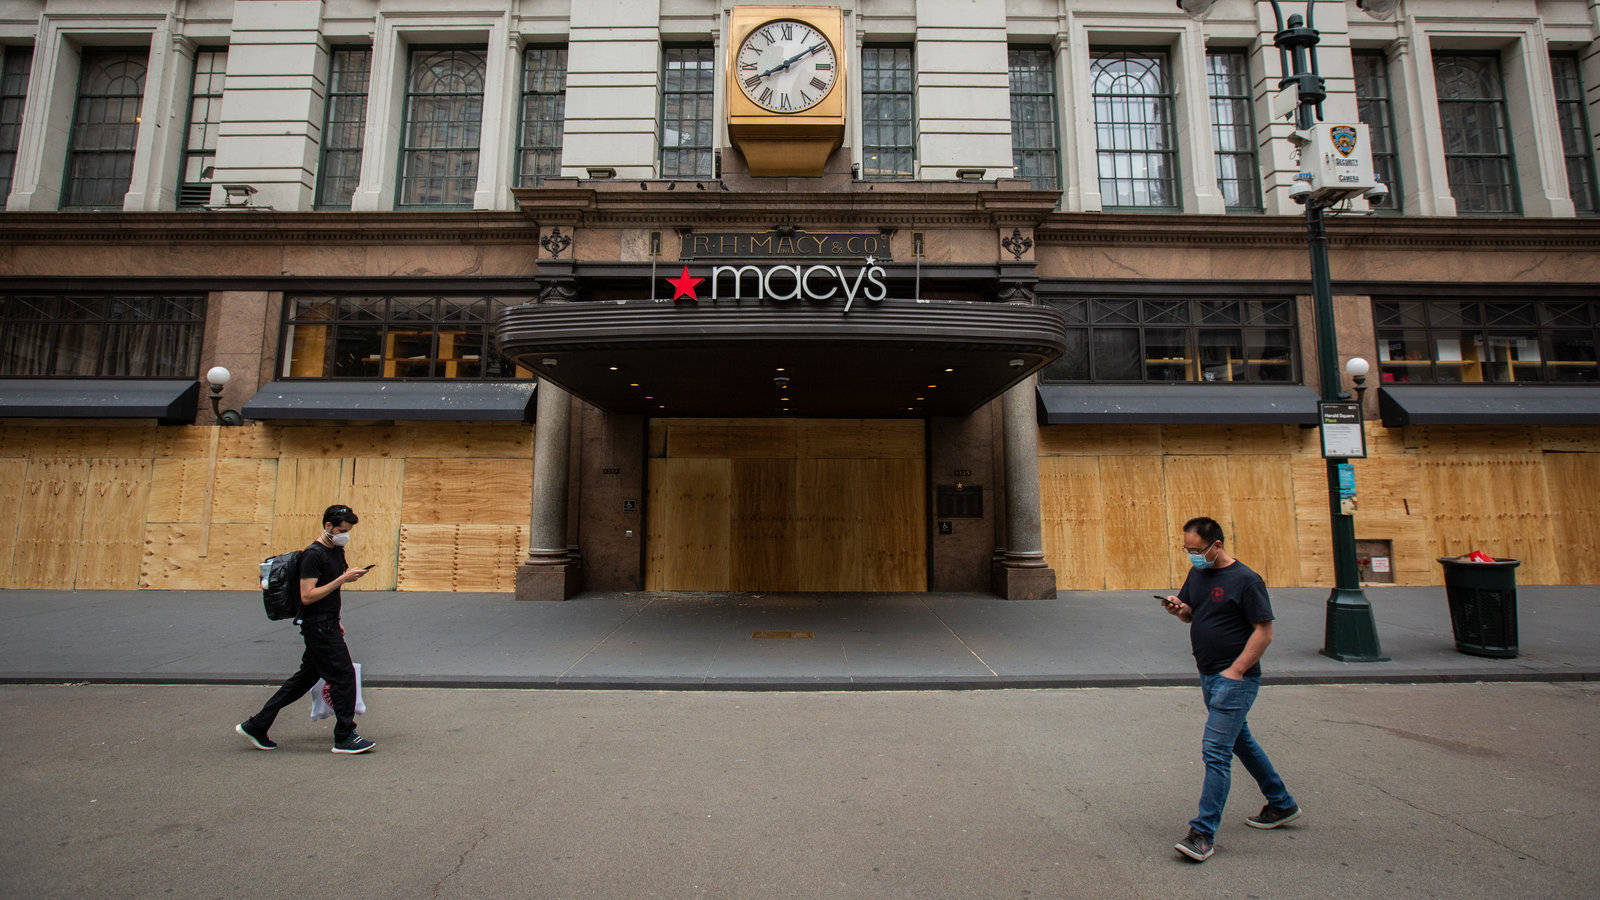 Macy's Boarded-Up Storefront Wallpaper